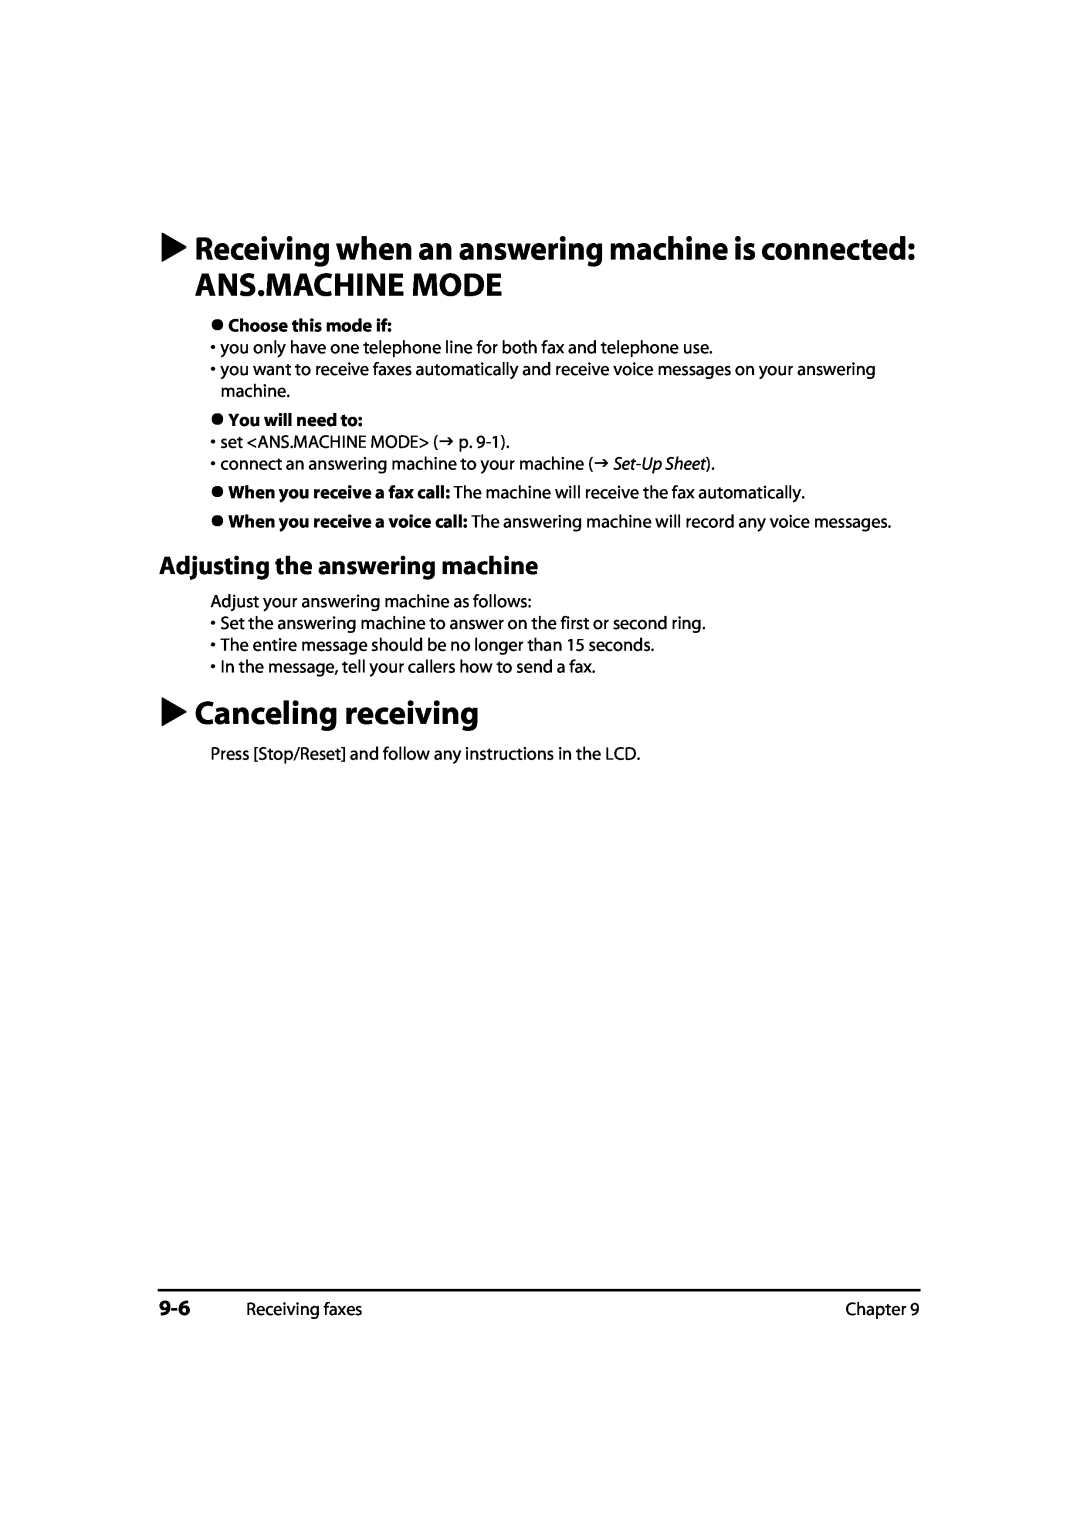 Canon 730i Ans.Machine Mode, Canceling receiving, Receiving when an answering machine is connected, Choose this mode if 